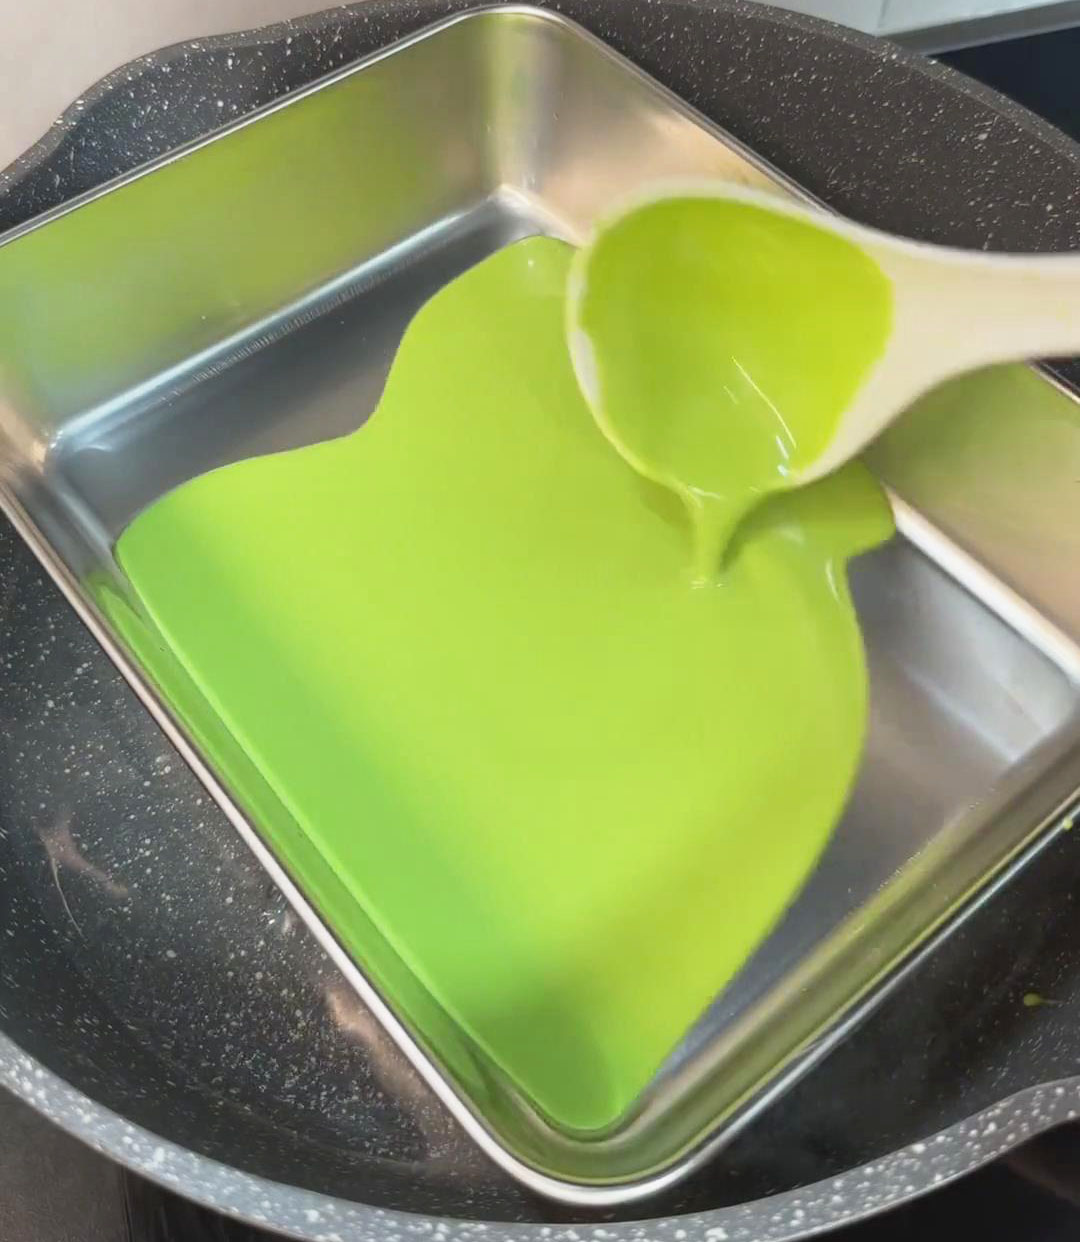 Pour the pandan mixture first and create an even, thin layer